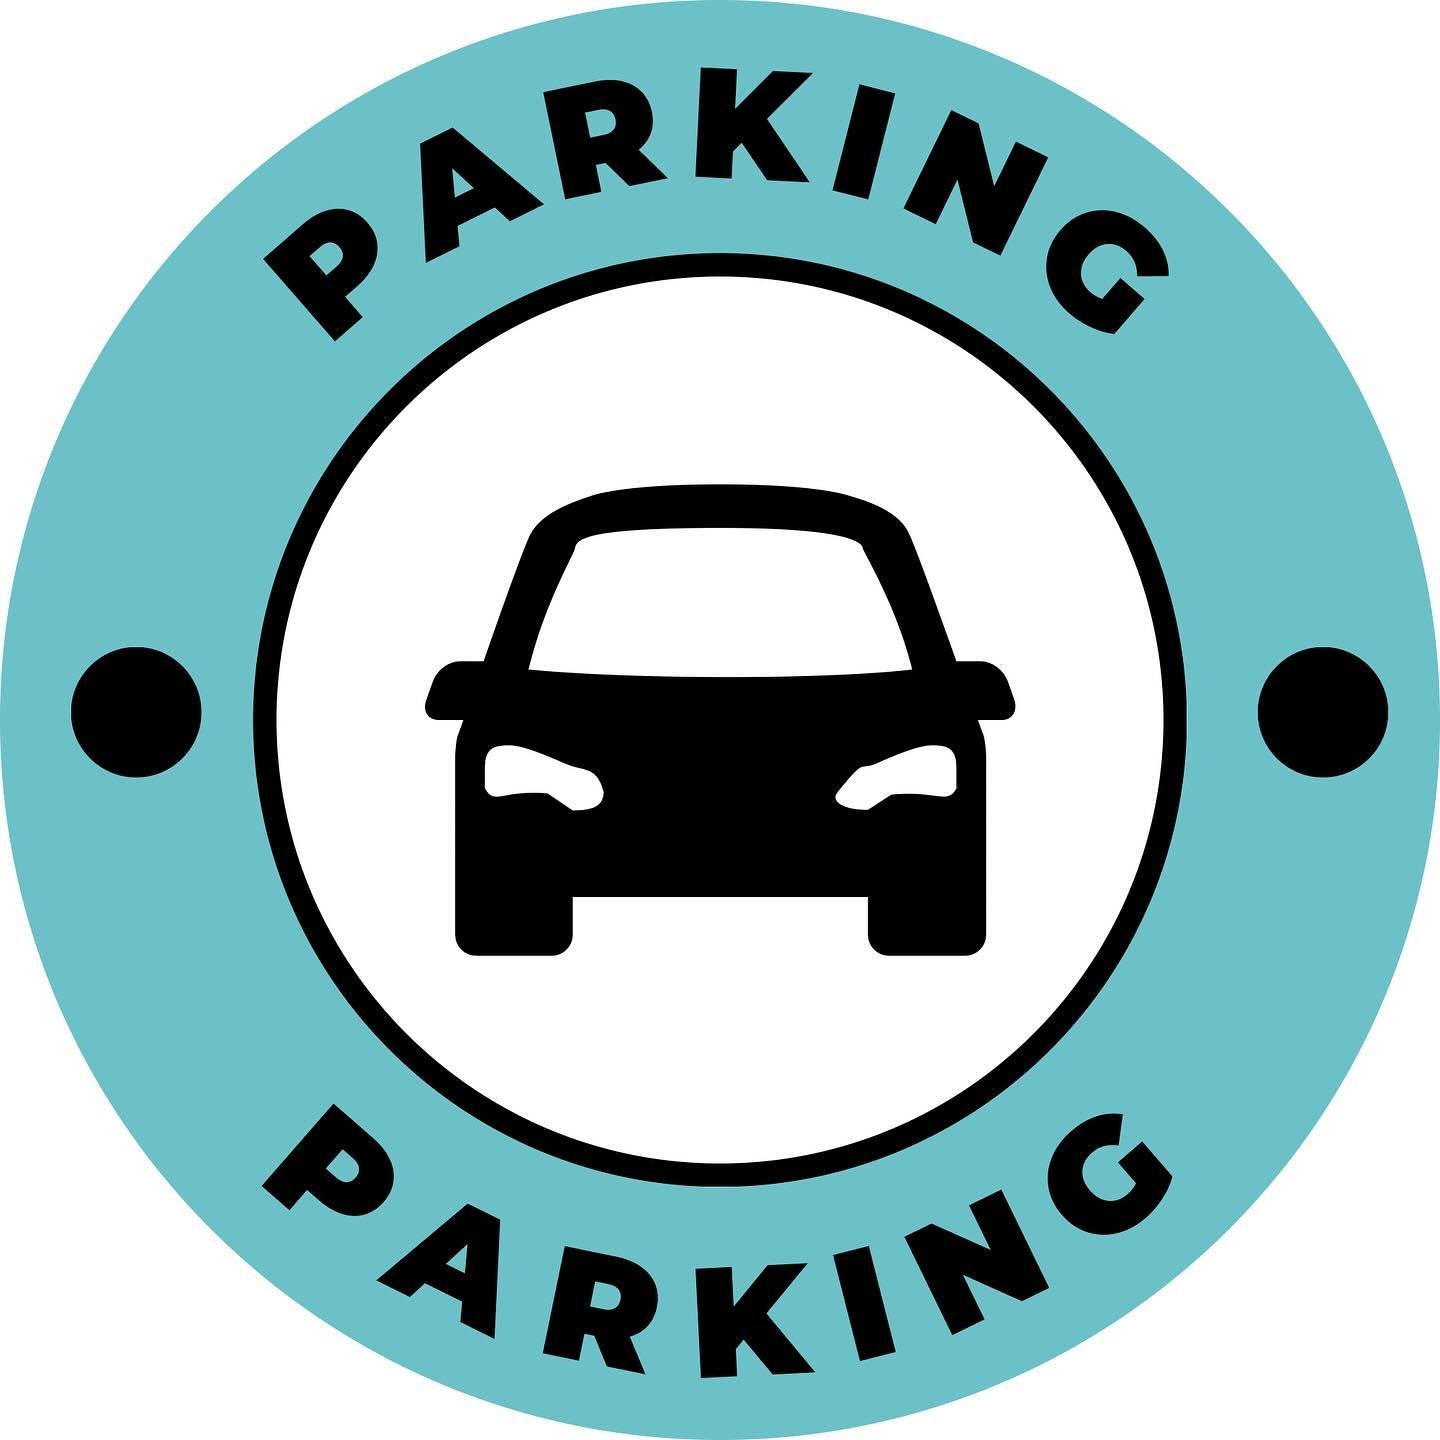 Struggling to park at the salon? 
Park at Cranmer Road car park (behind Wilkinsons) and we will discount you &pound;1 from your treatment at check out! 

1 hour = &pound;1.20 
2 hours = &pound;1.70 

@paybyphone_uk LOCATION ID = 59014

T&amp;Cs apply